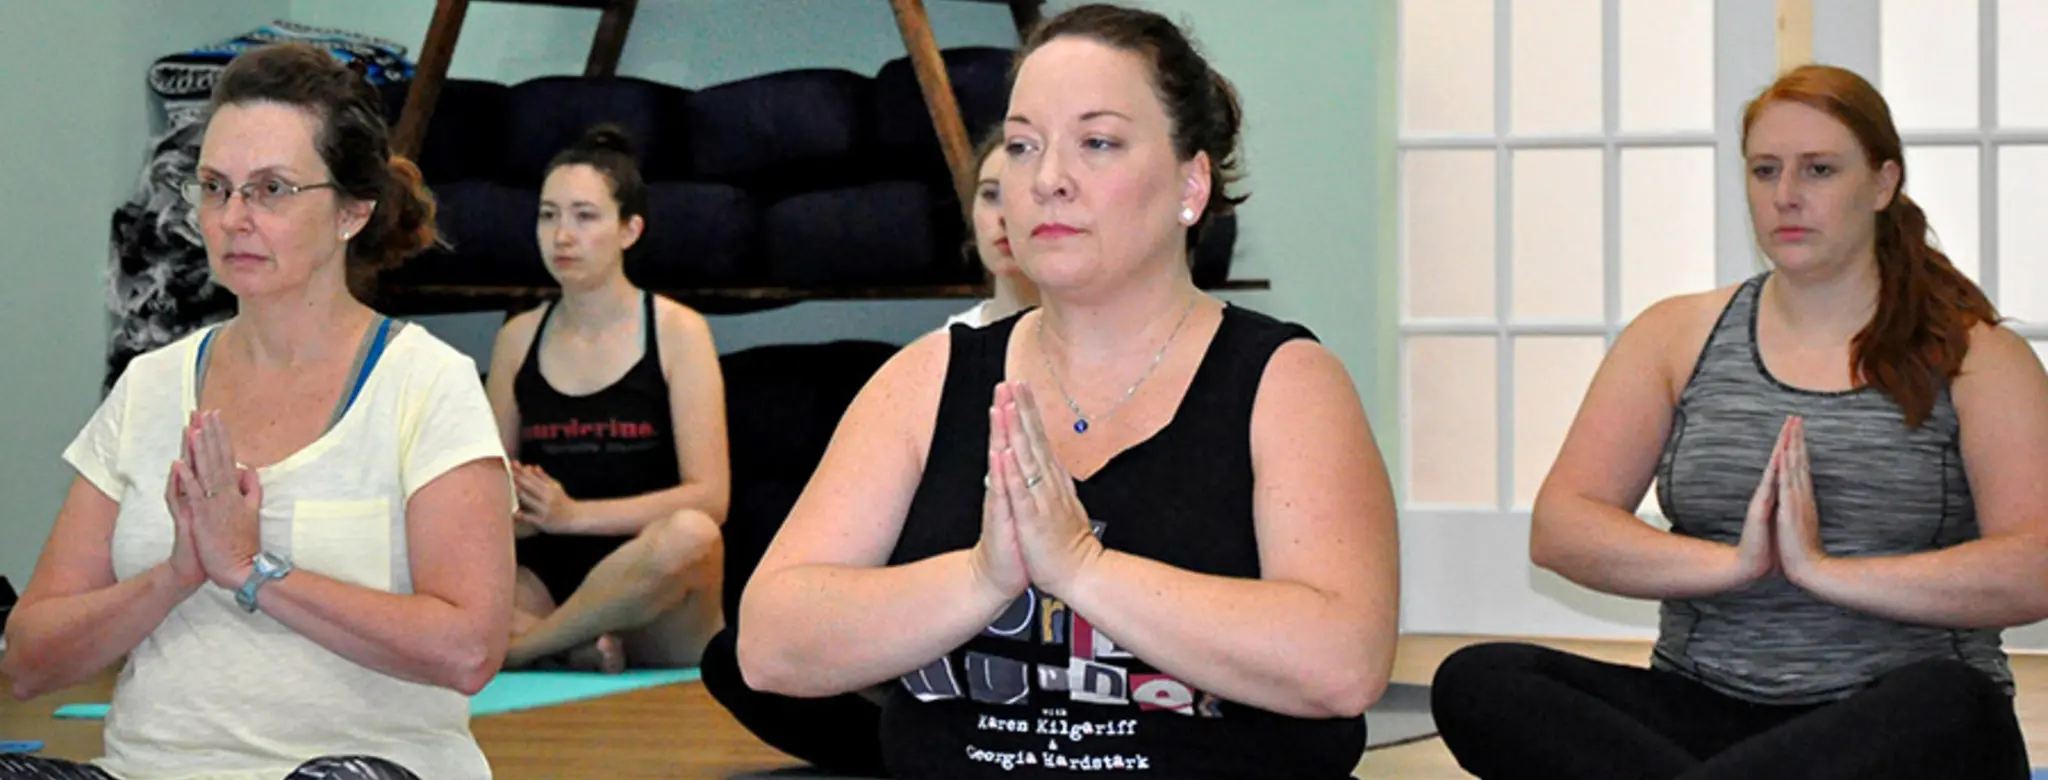 Murderinos practicing yoga at charity event for End the Backlog